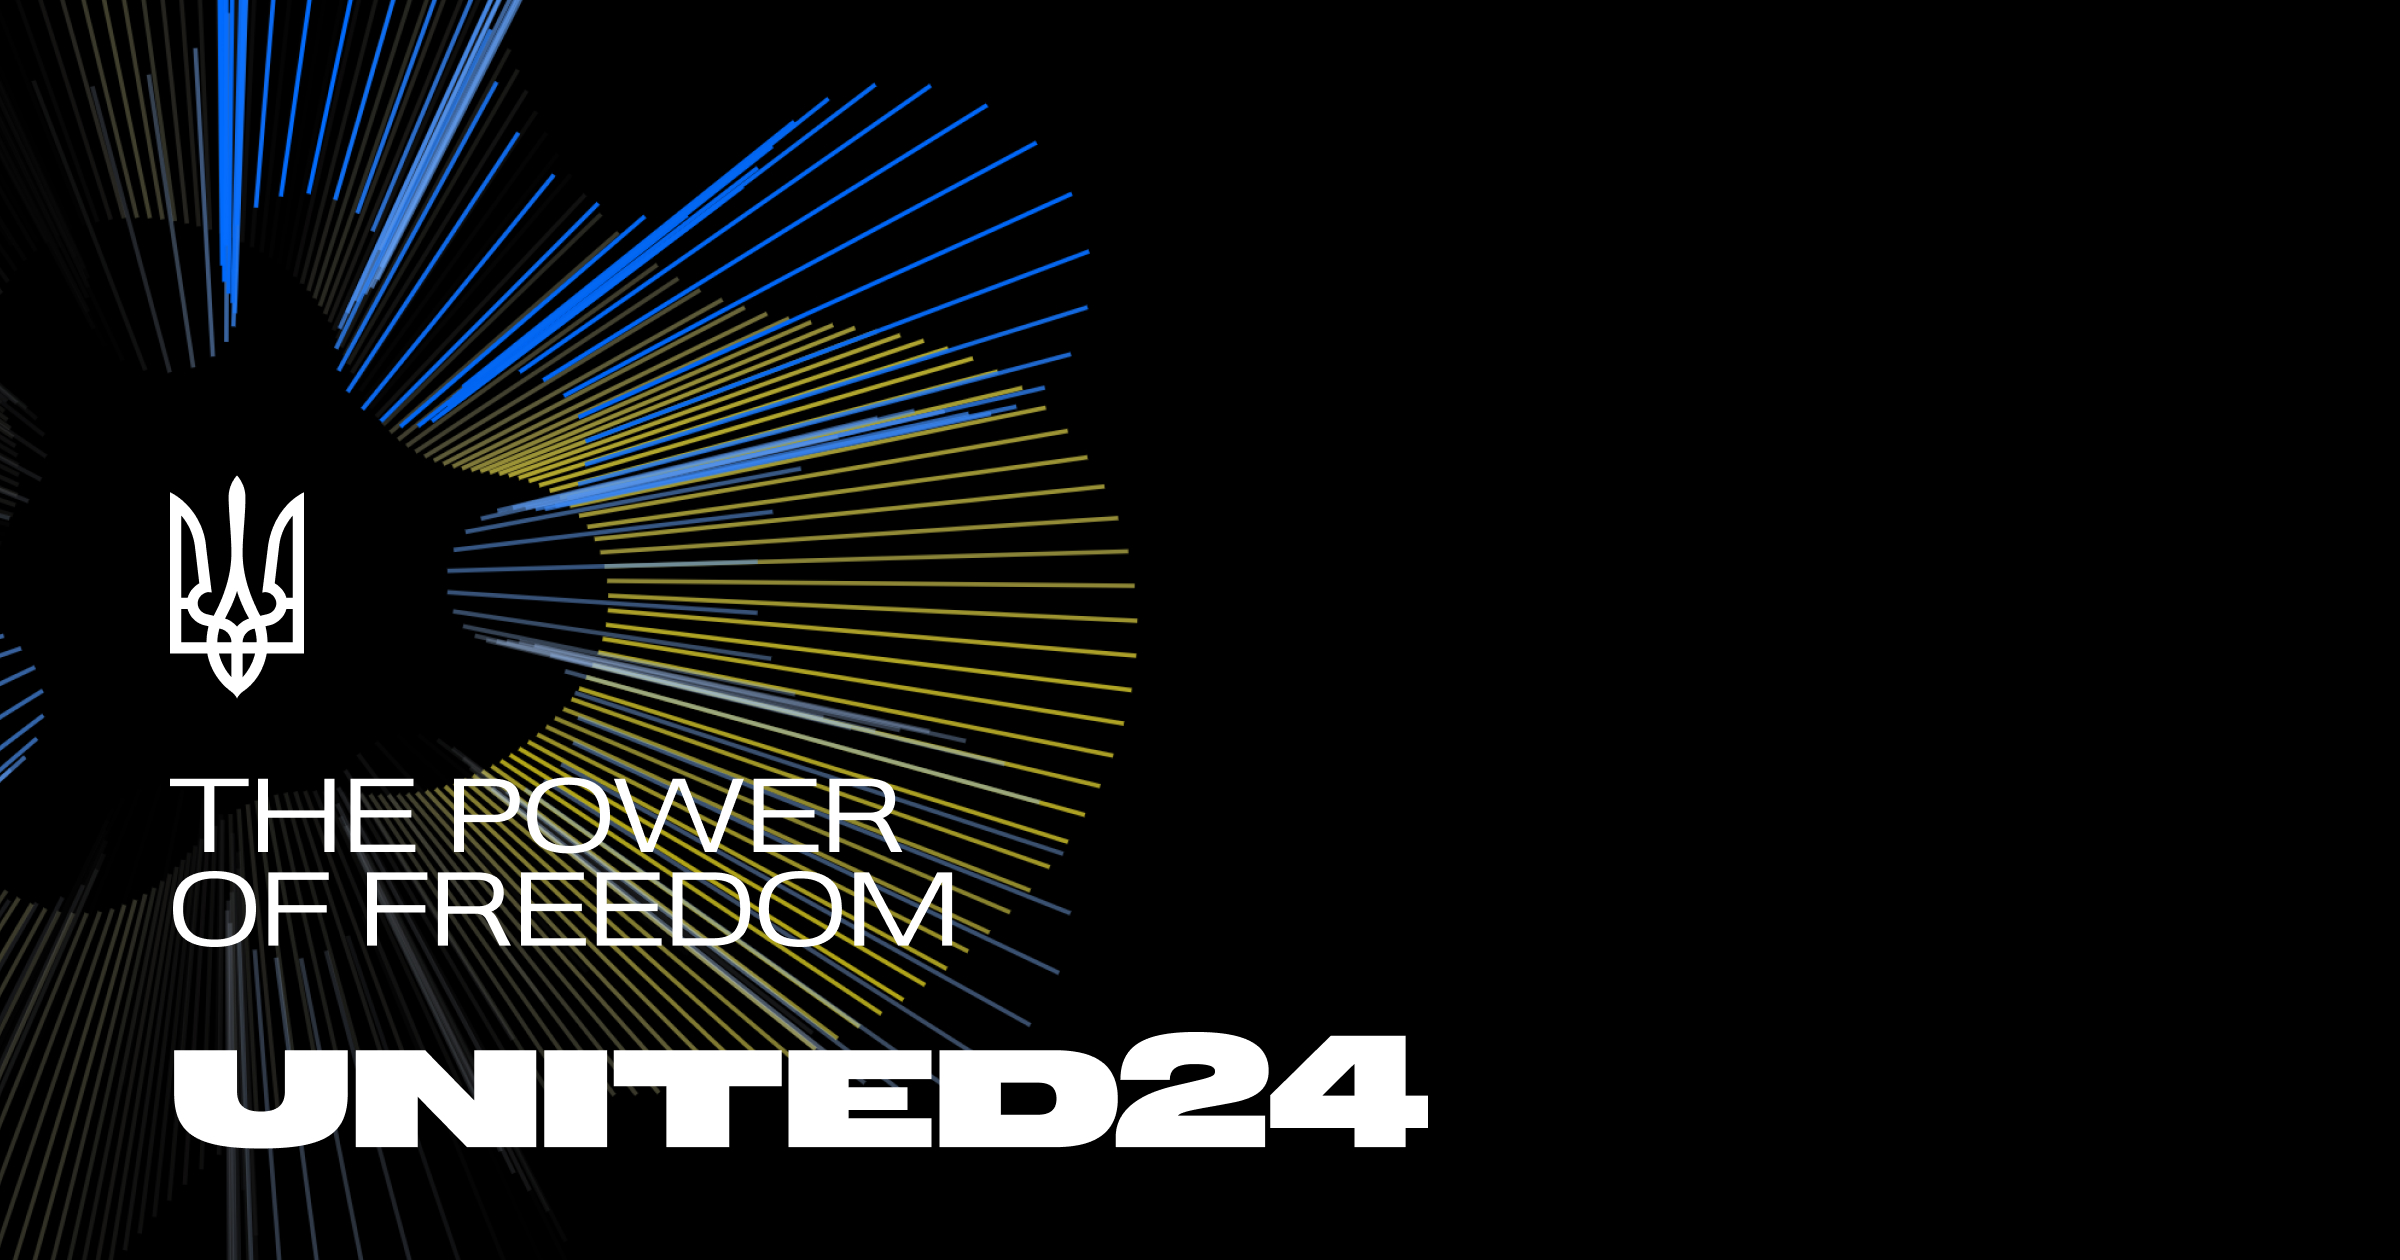 UNITED24 - The initiative of the President of Ukraine